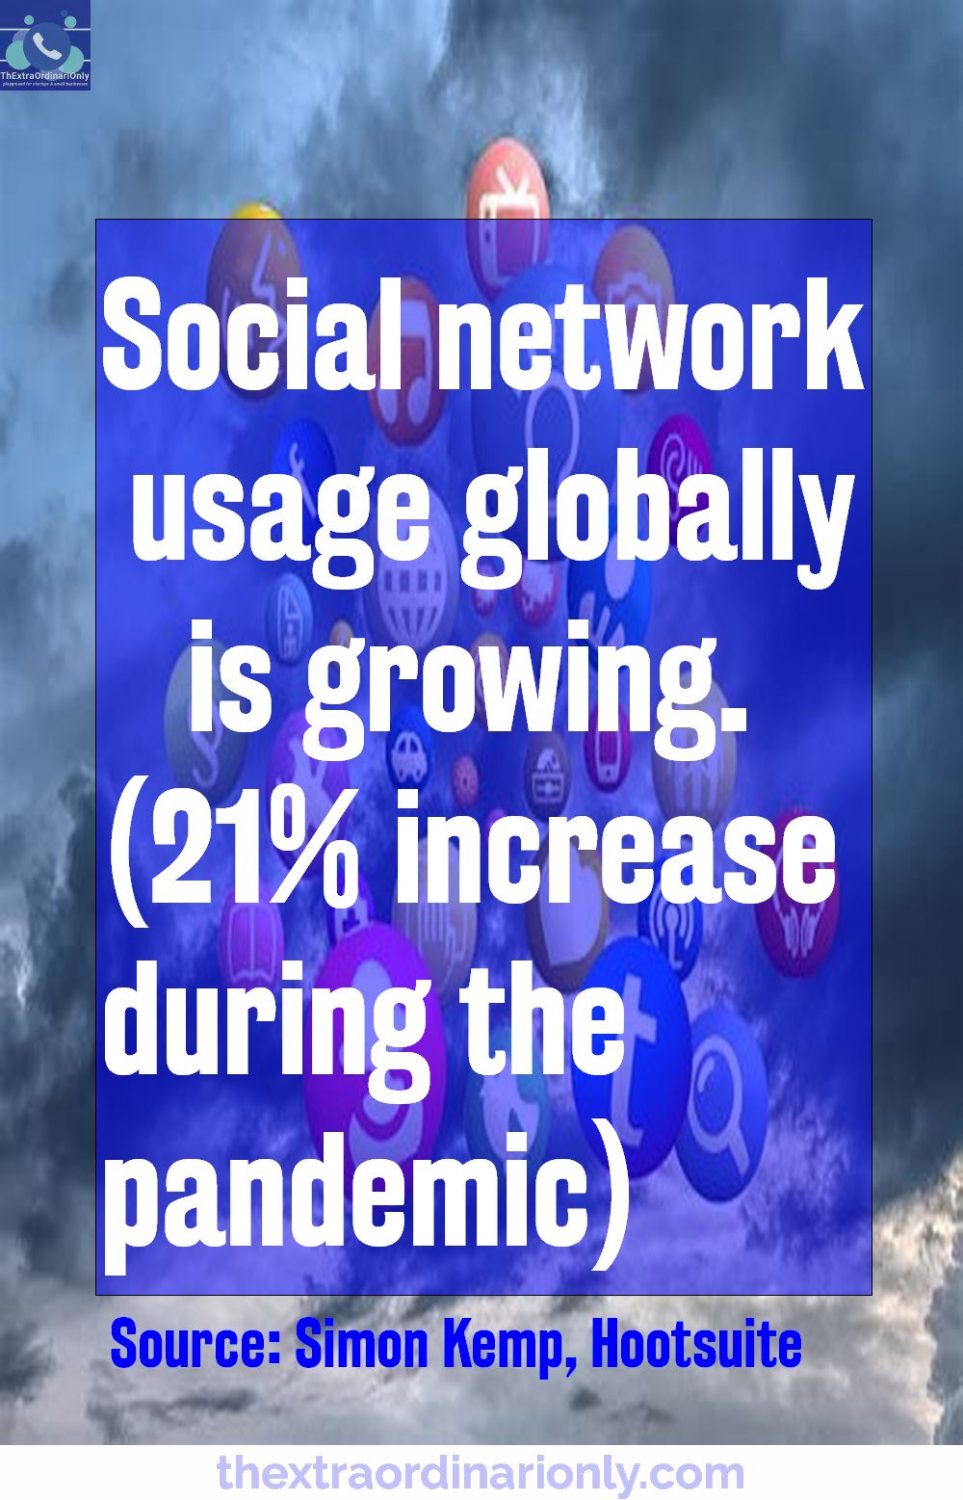 21% increase in users during covid_19 pandemic